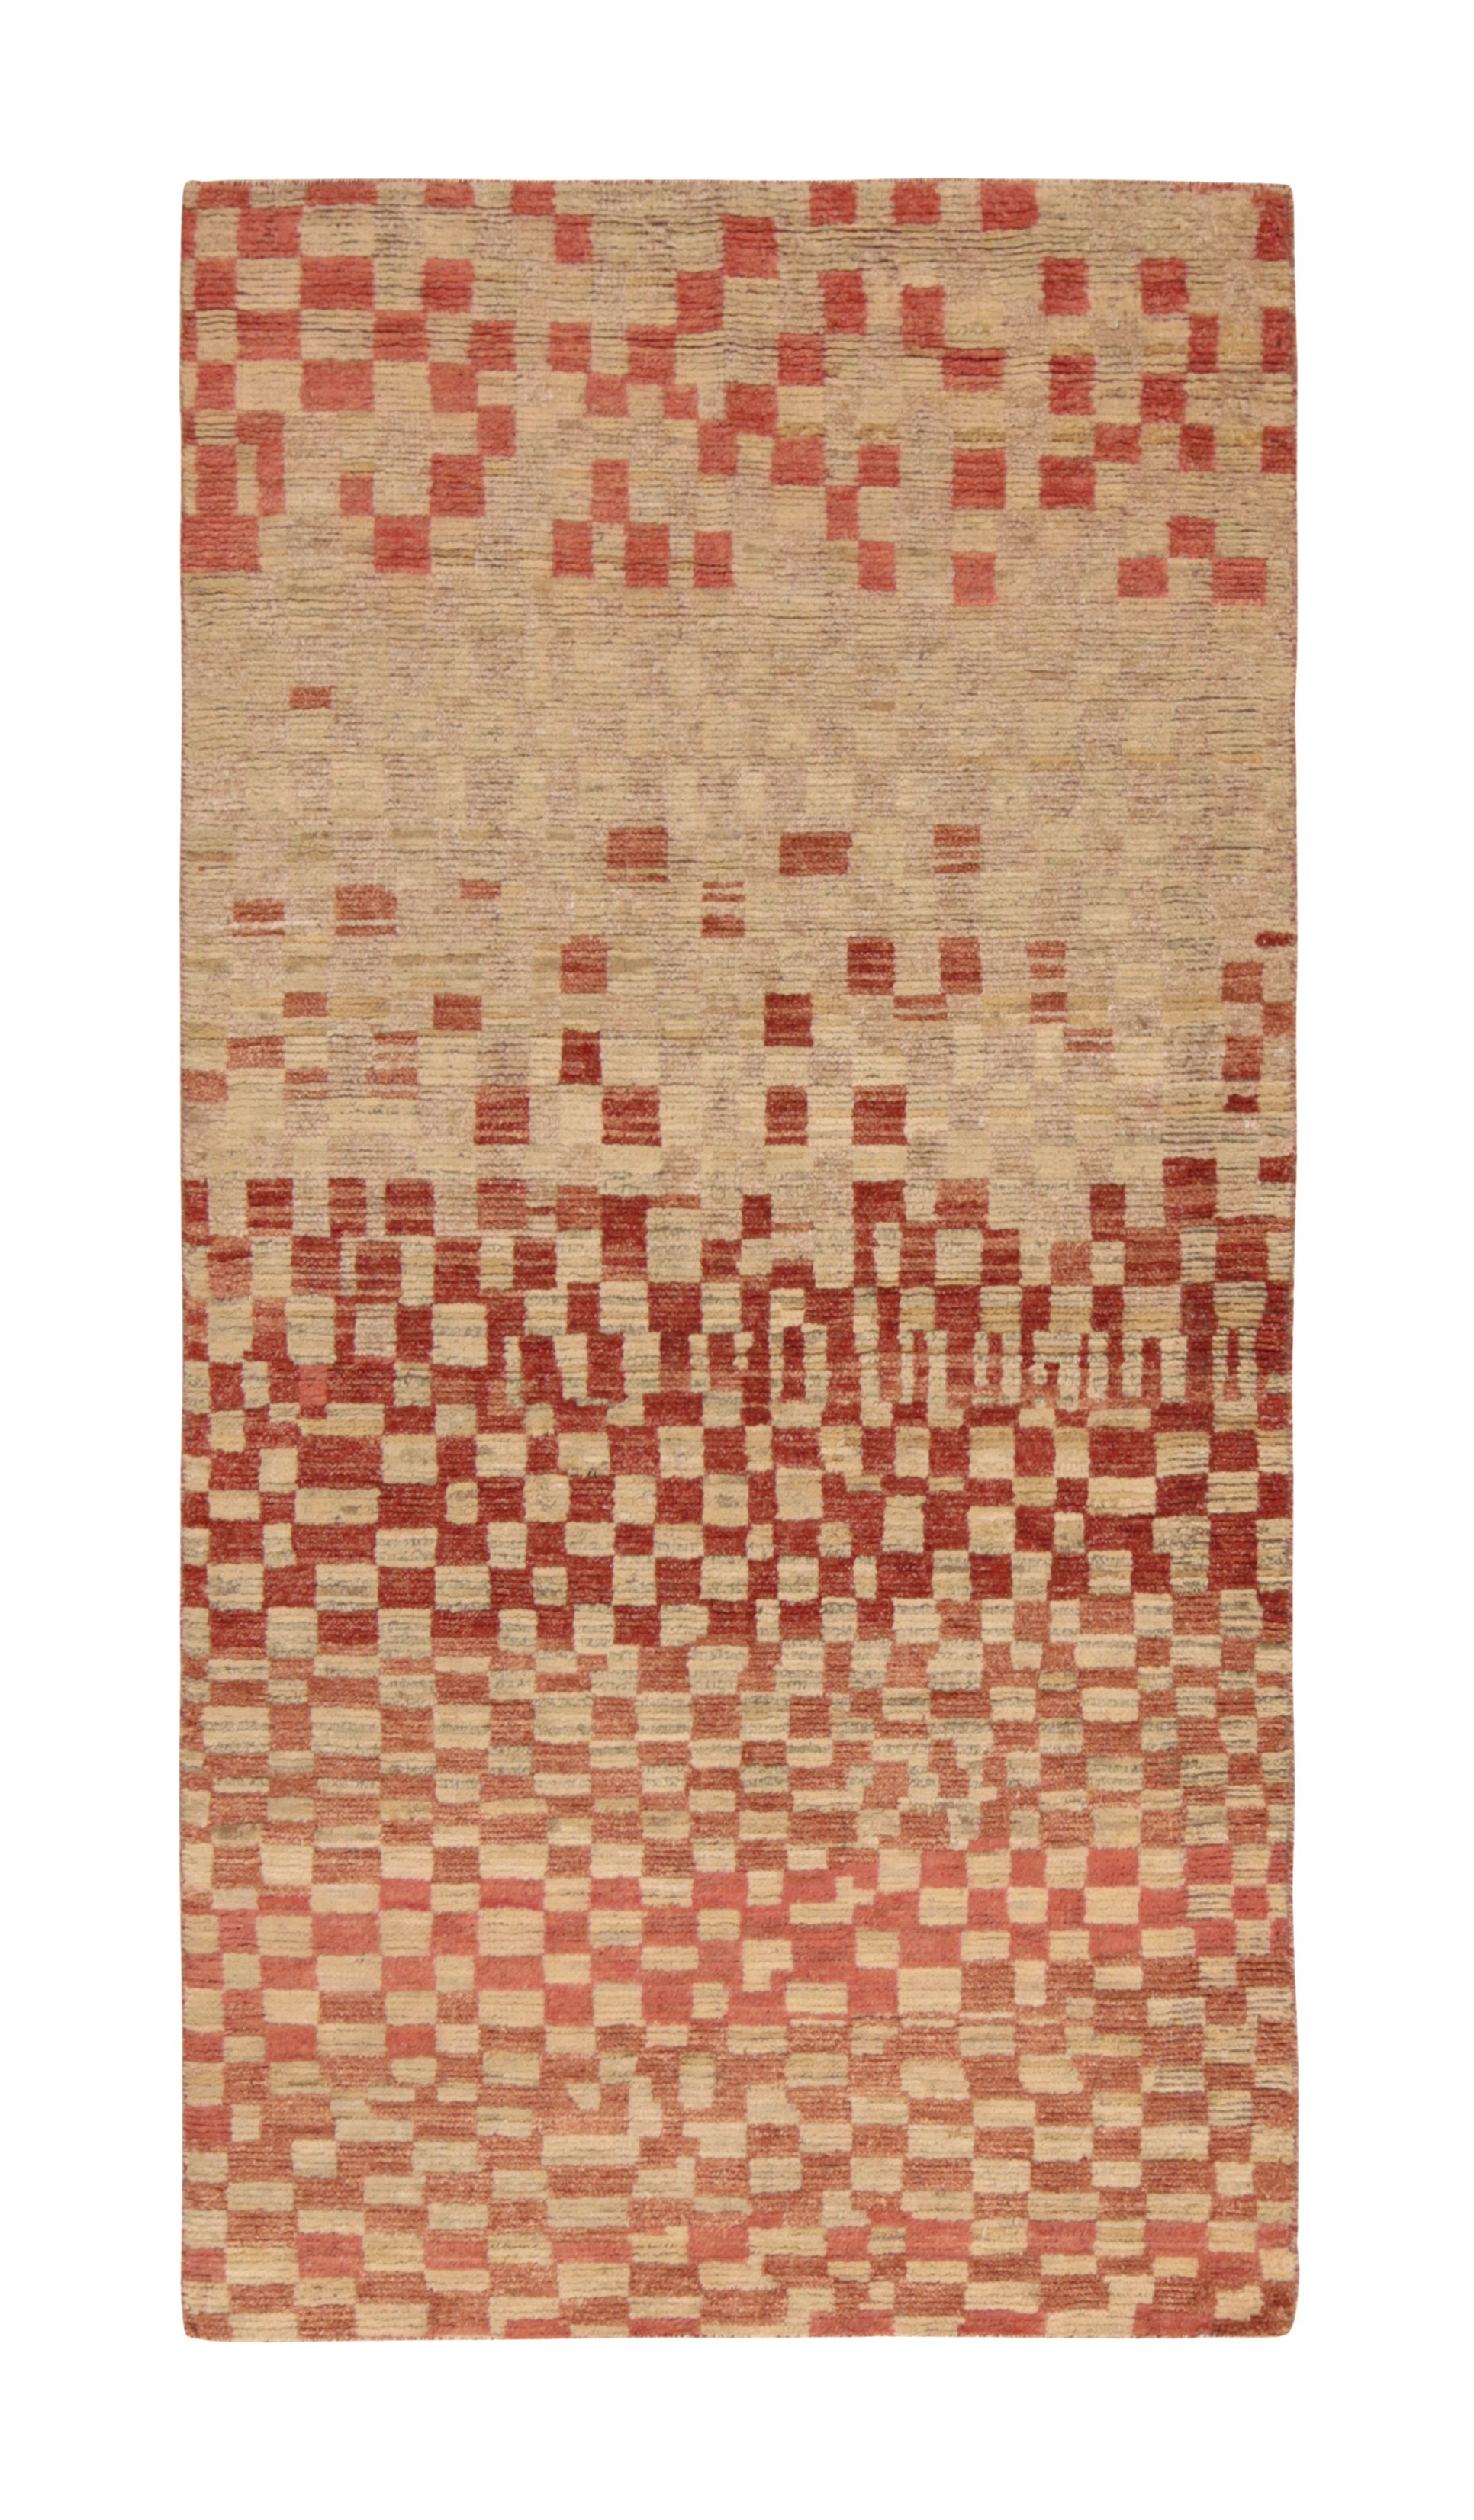 Rug & Kilim’s Moroccan Style Rug in Beige-Brown and Red Geometric Pattern